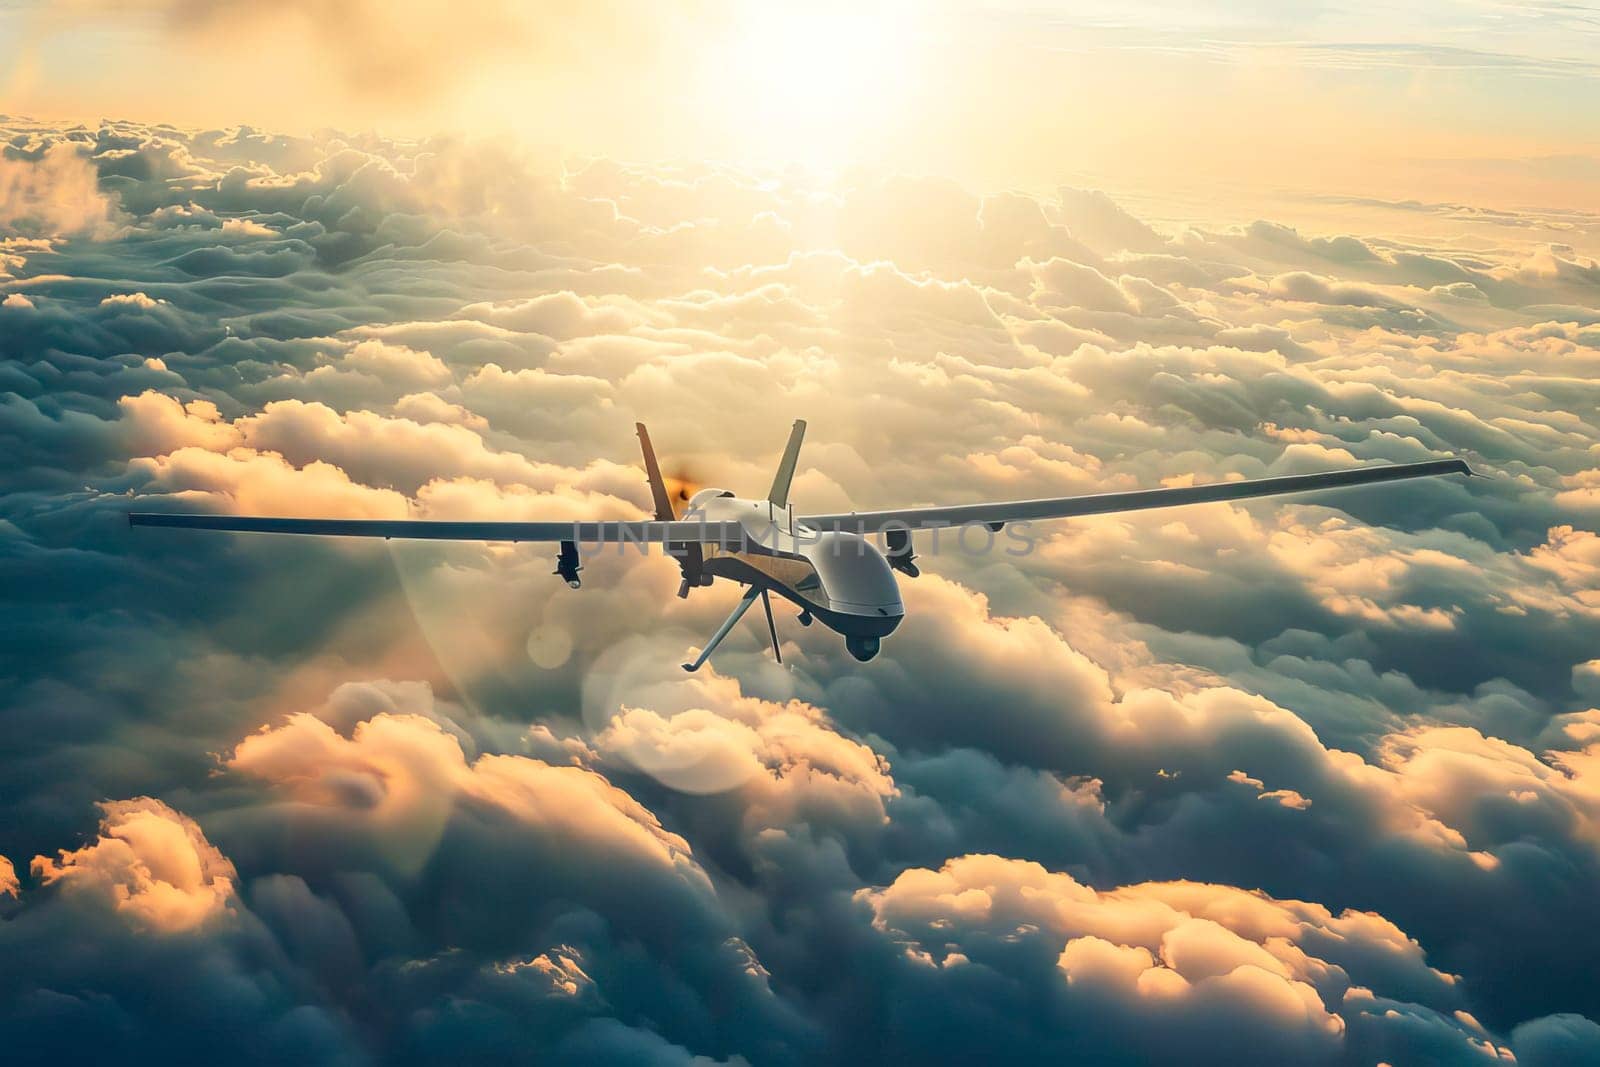 A military unmanned aerial vehicle flying high above thick clouds in the sky.